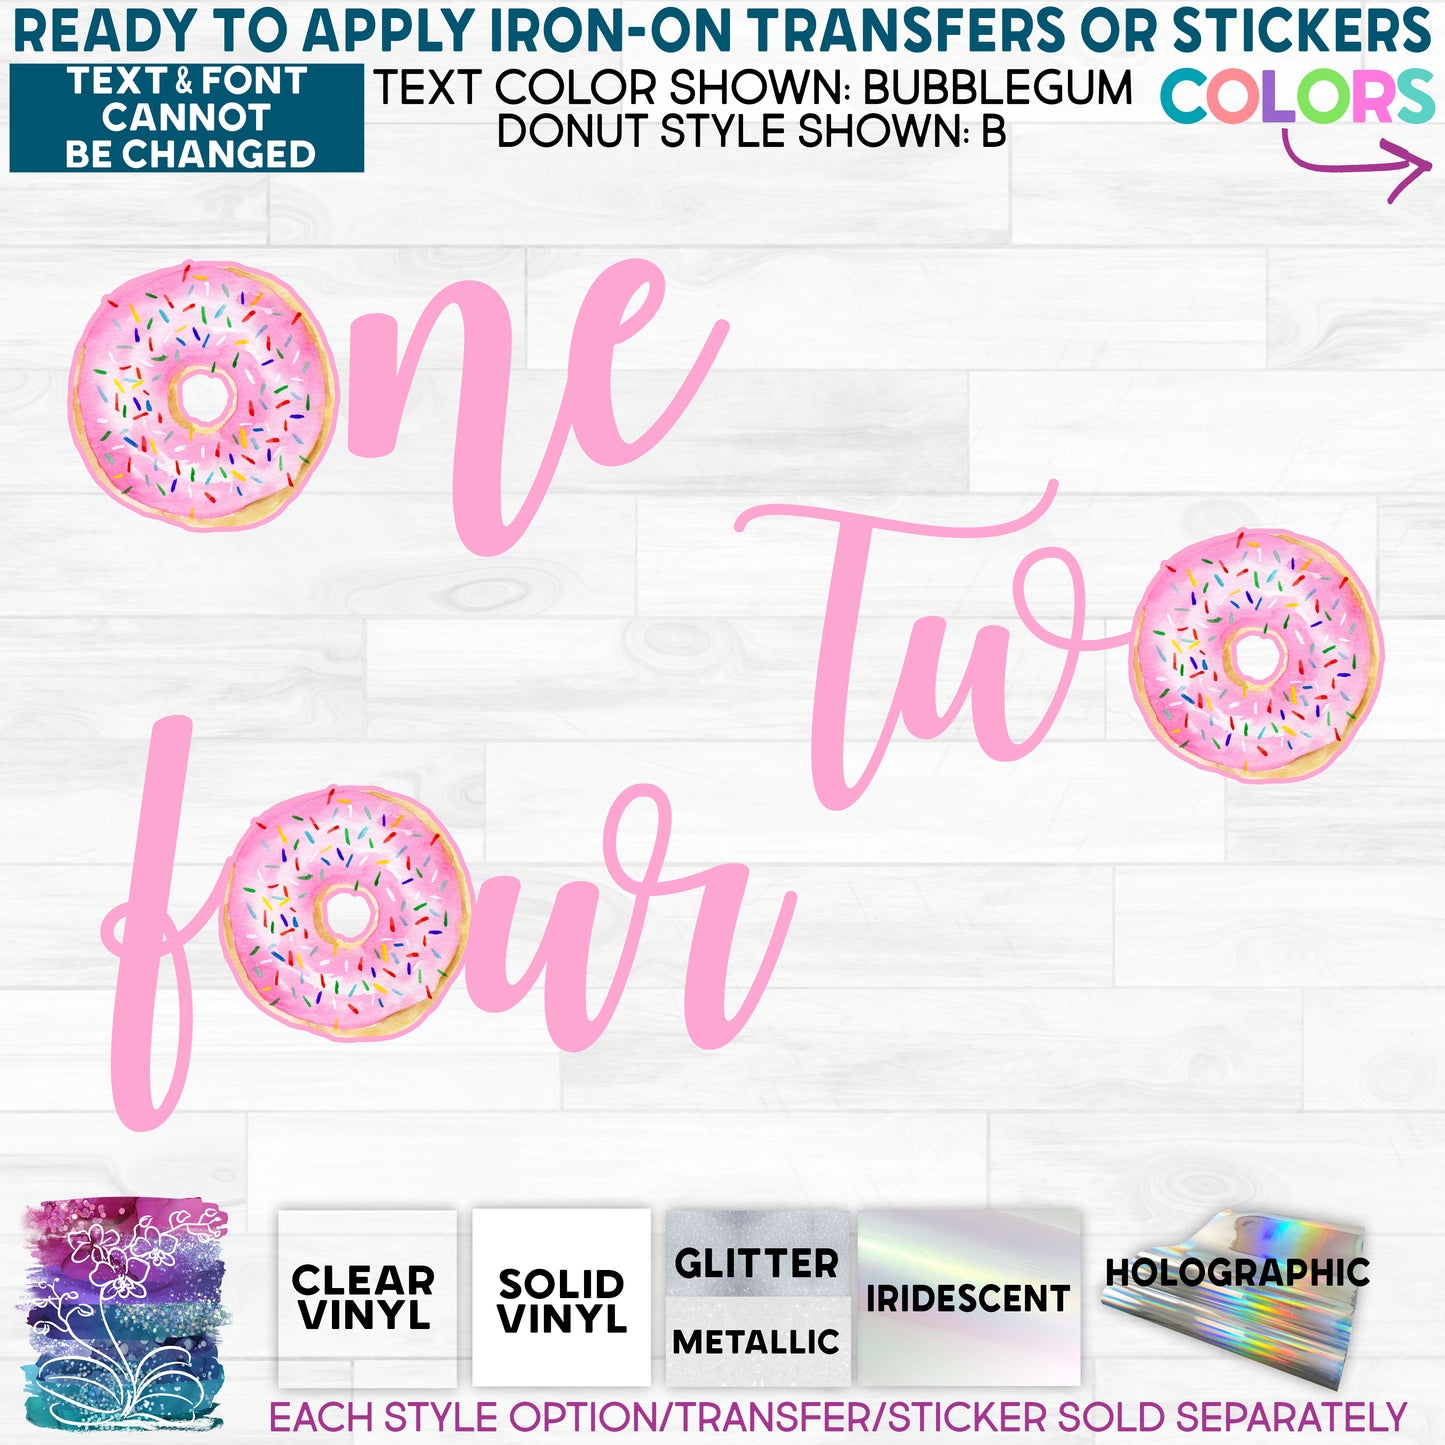 SBS-242-2 Watercolor Donut One Two Four More Donut Styles Available! Made-to-Order Iron-On Transfer or Sticker